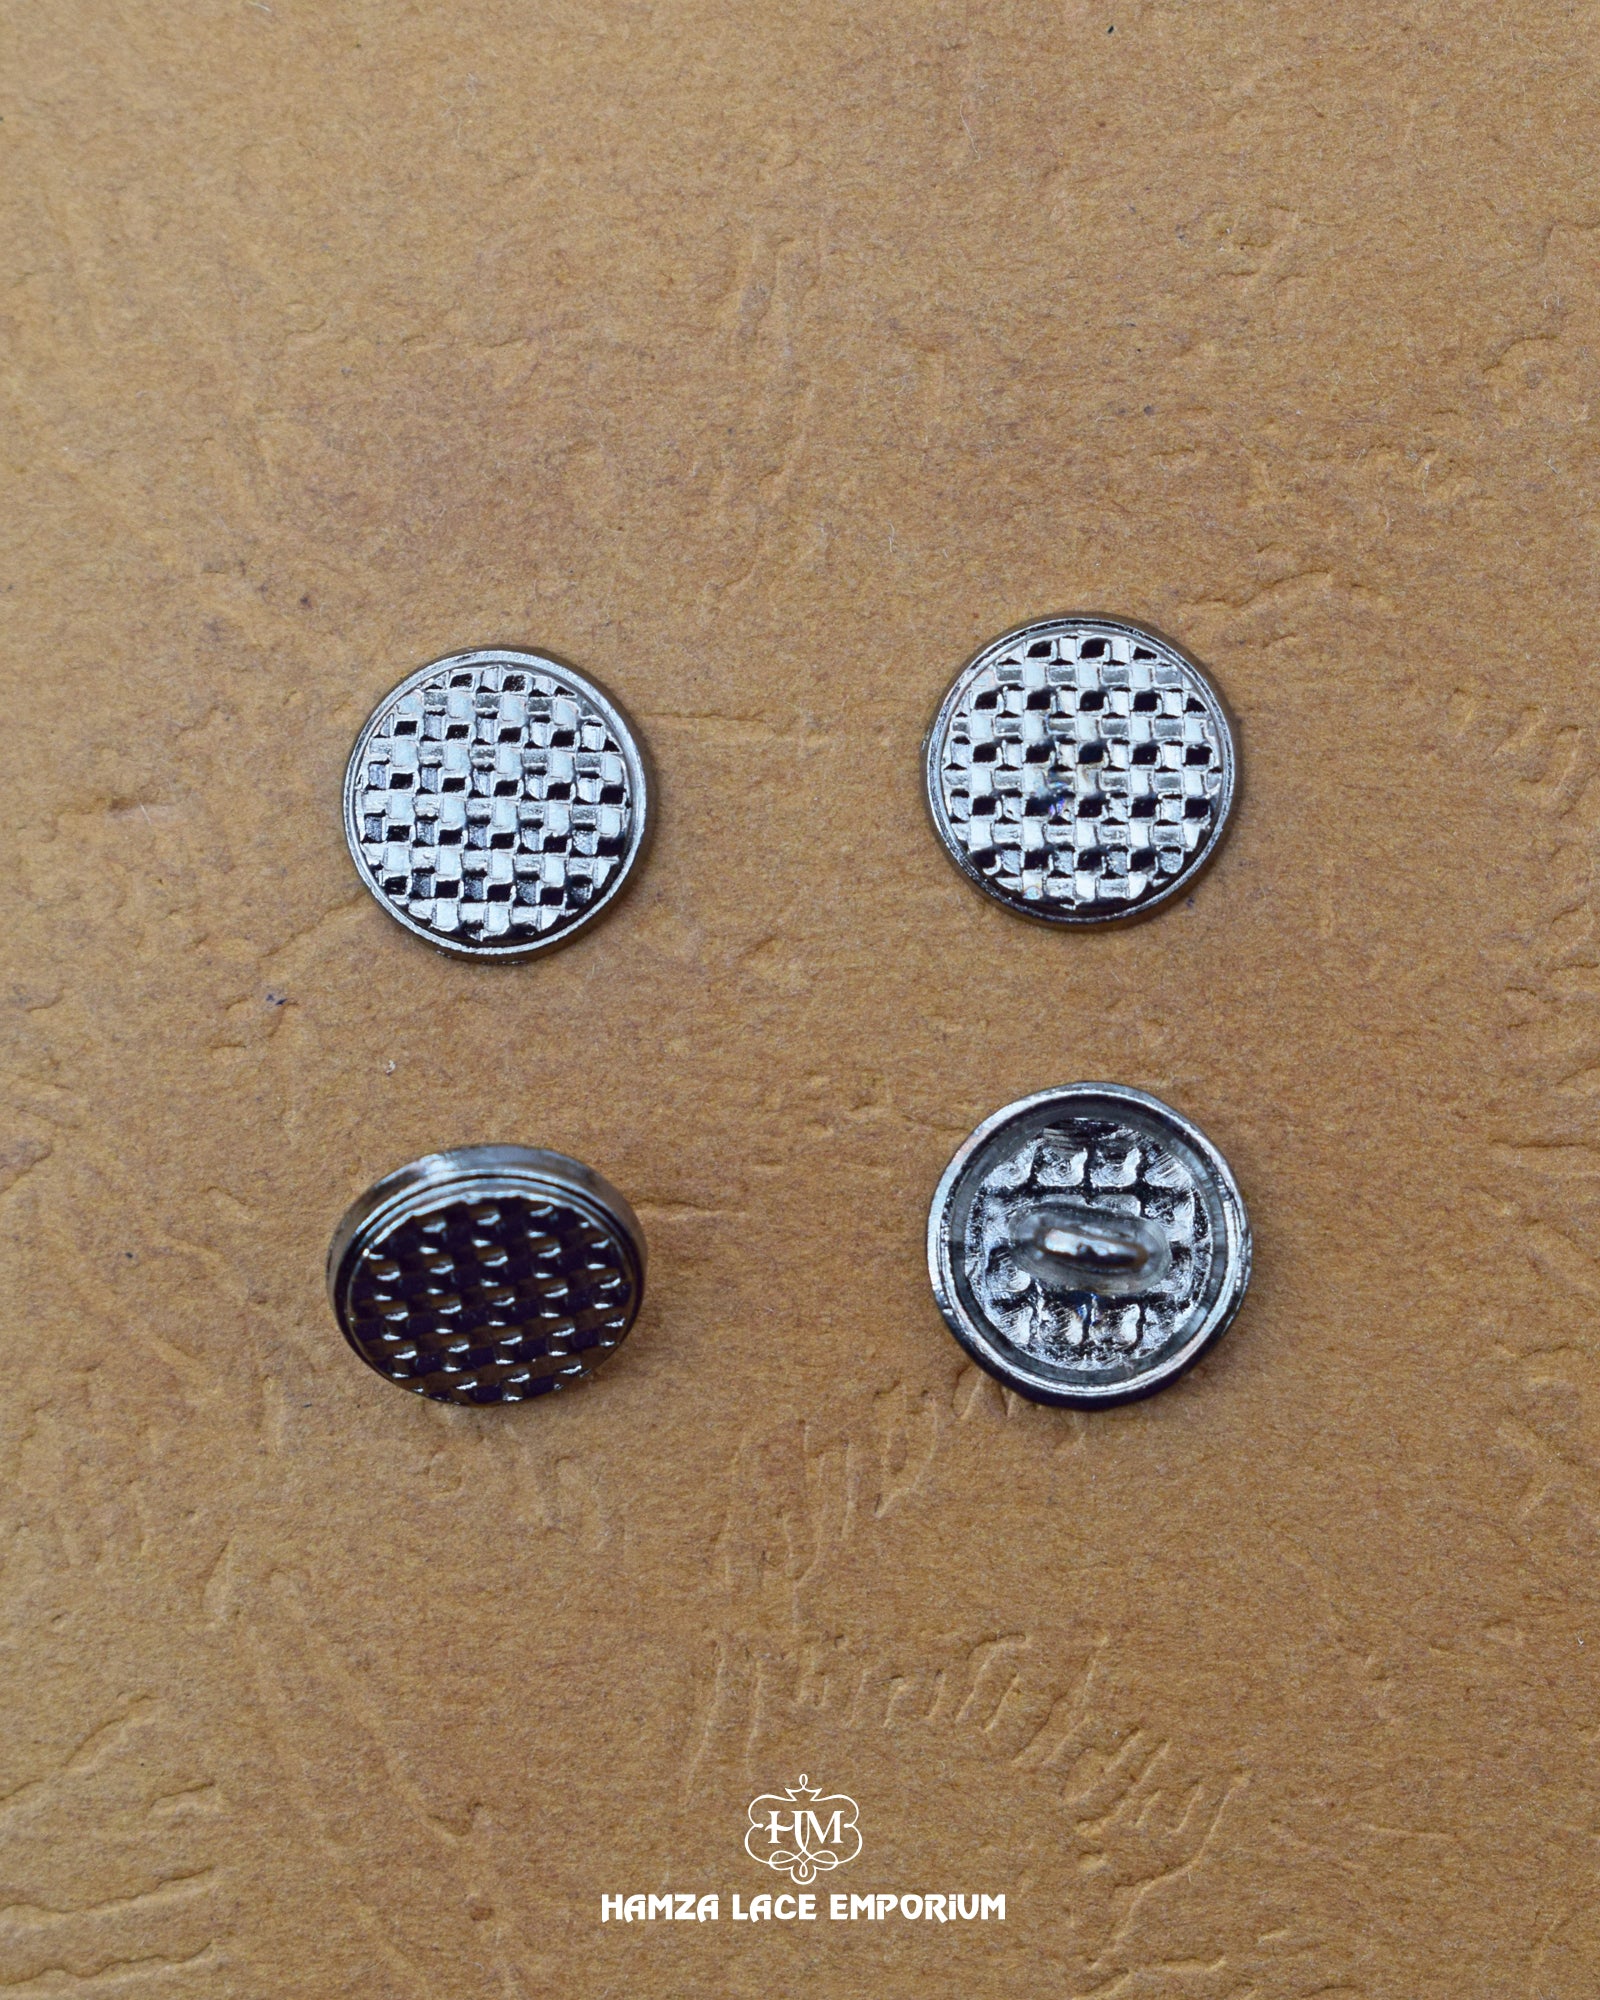 'Silver Metal Button MB613' and the sign 'Hamza Lace' at the bottom